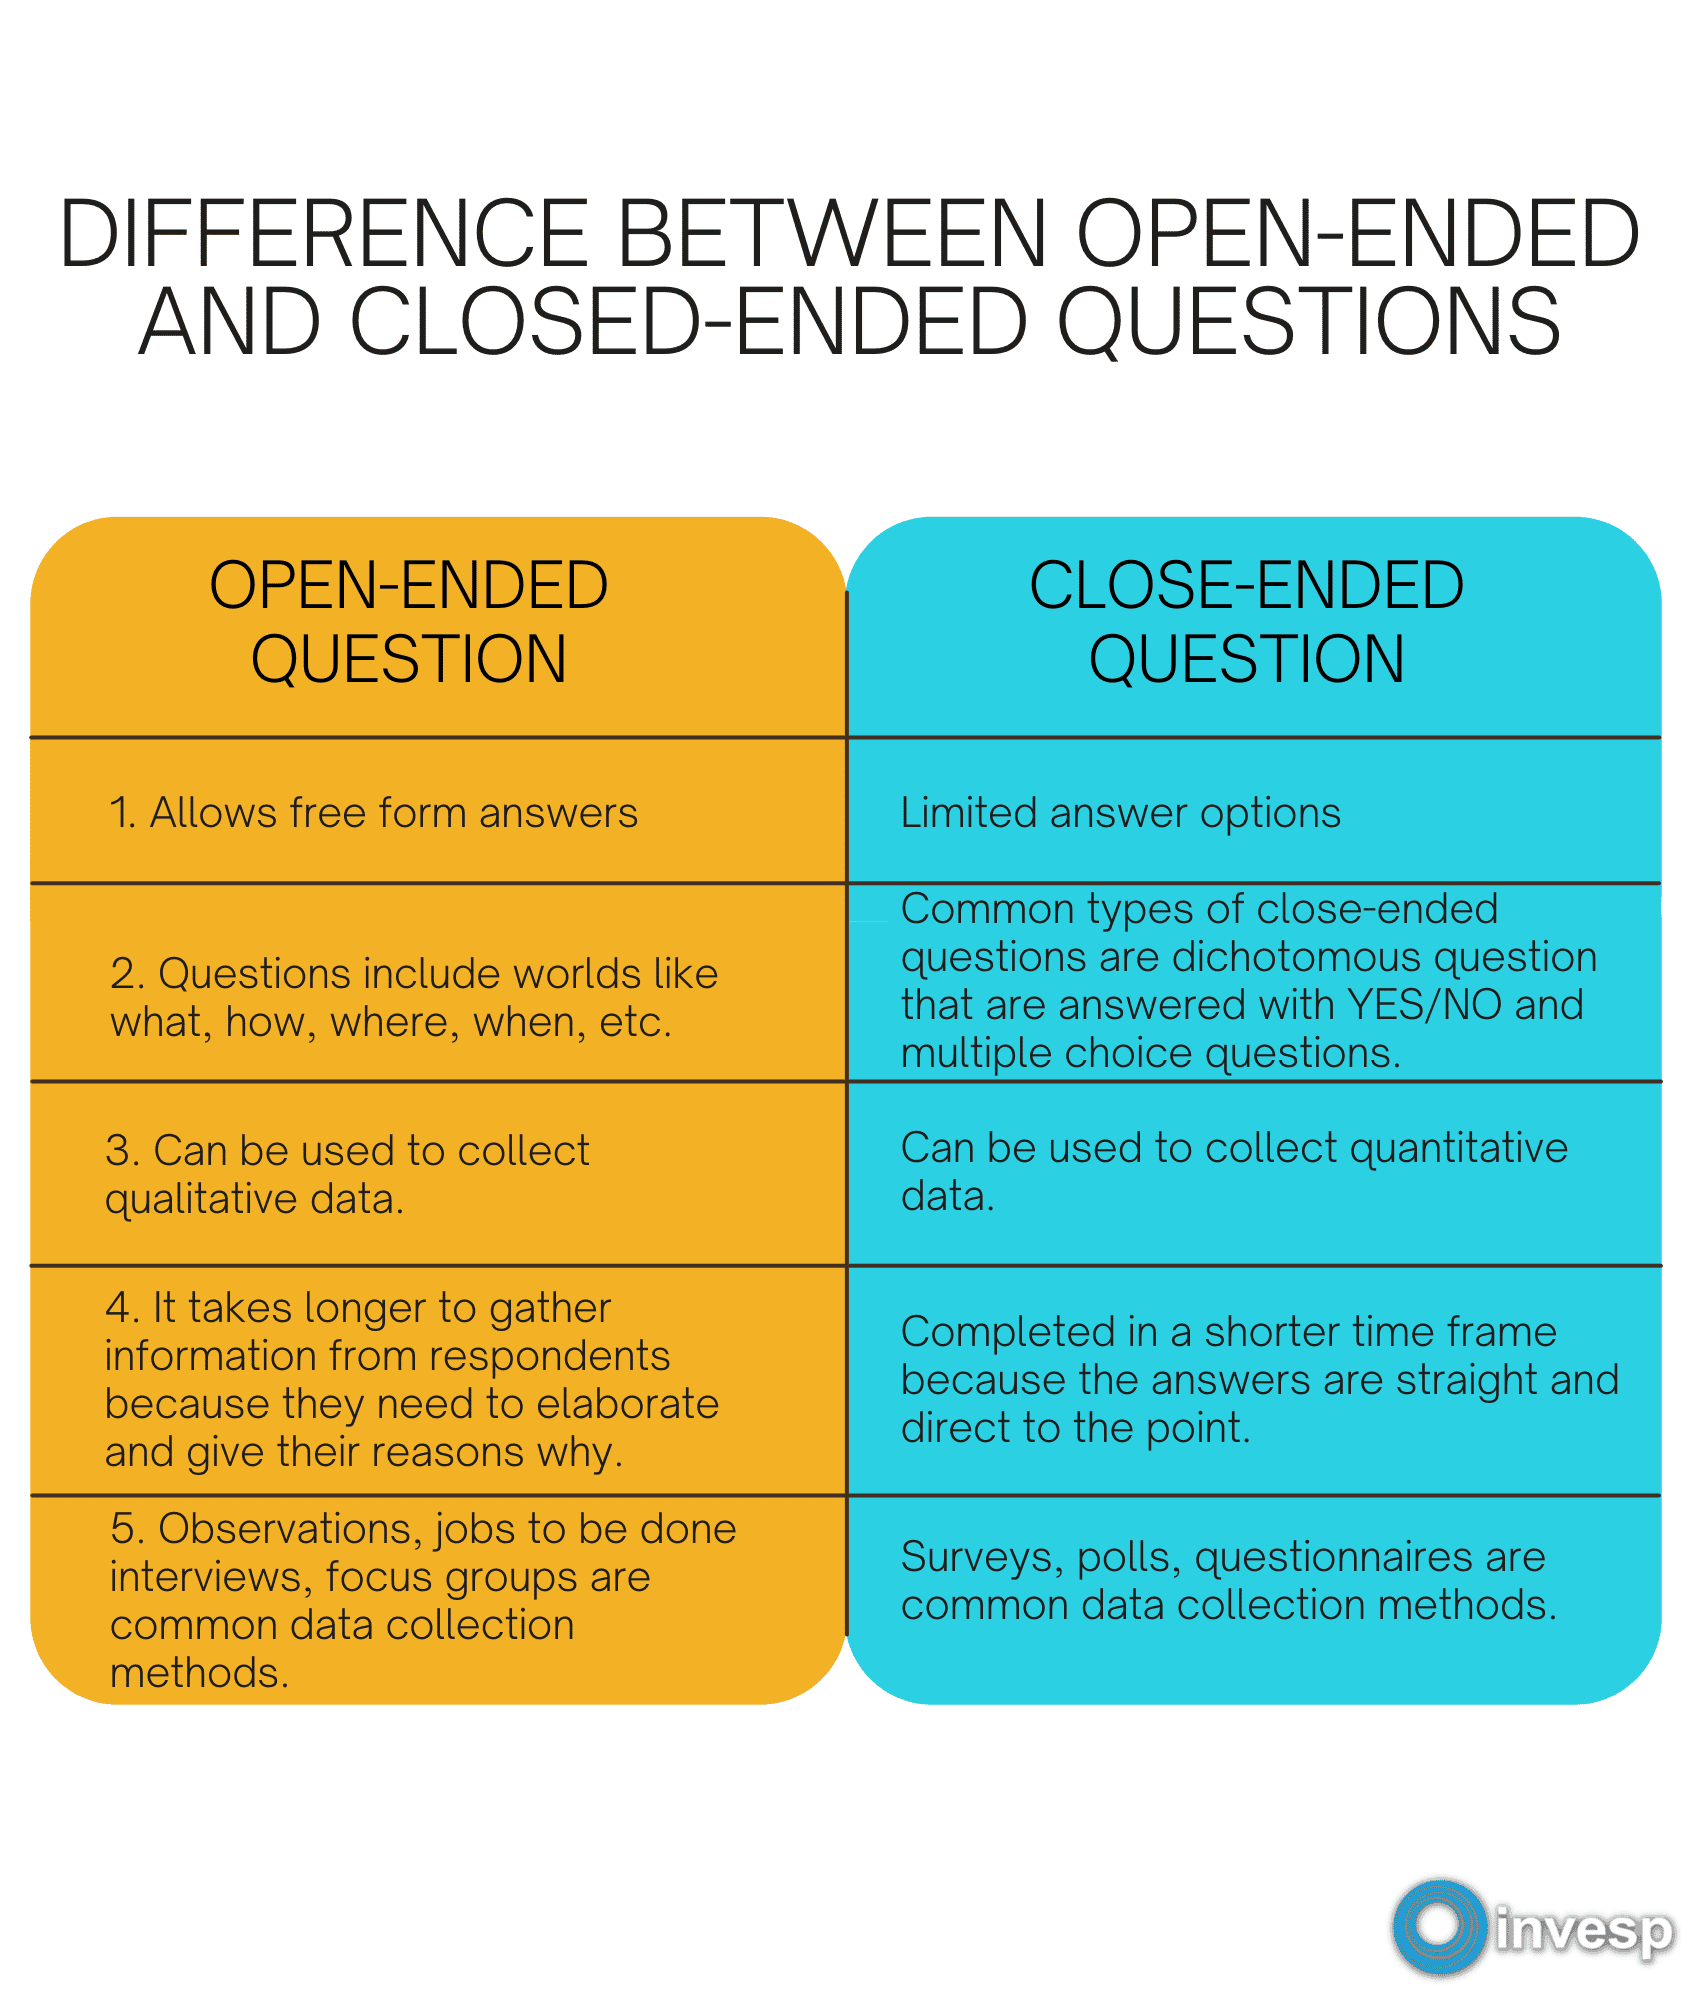 Closed-Ended Questions: Types and Examples